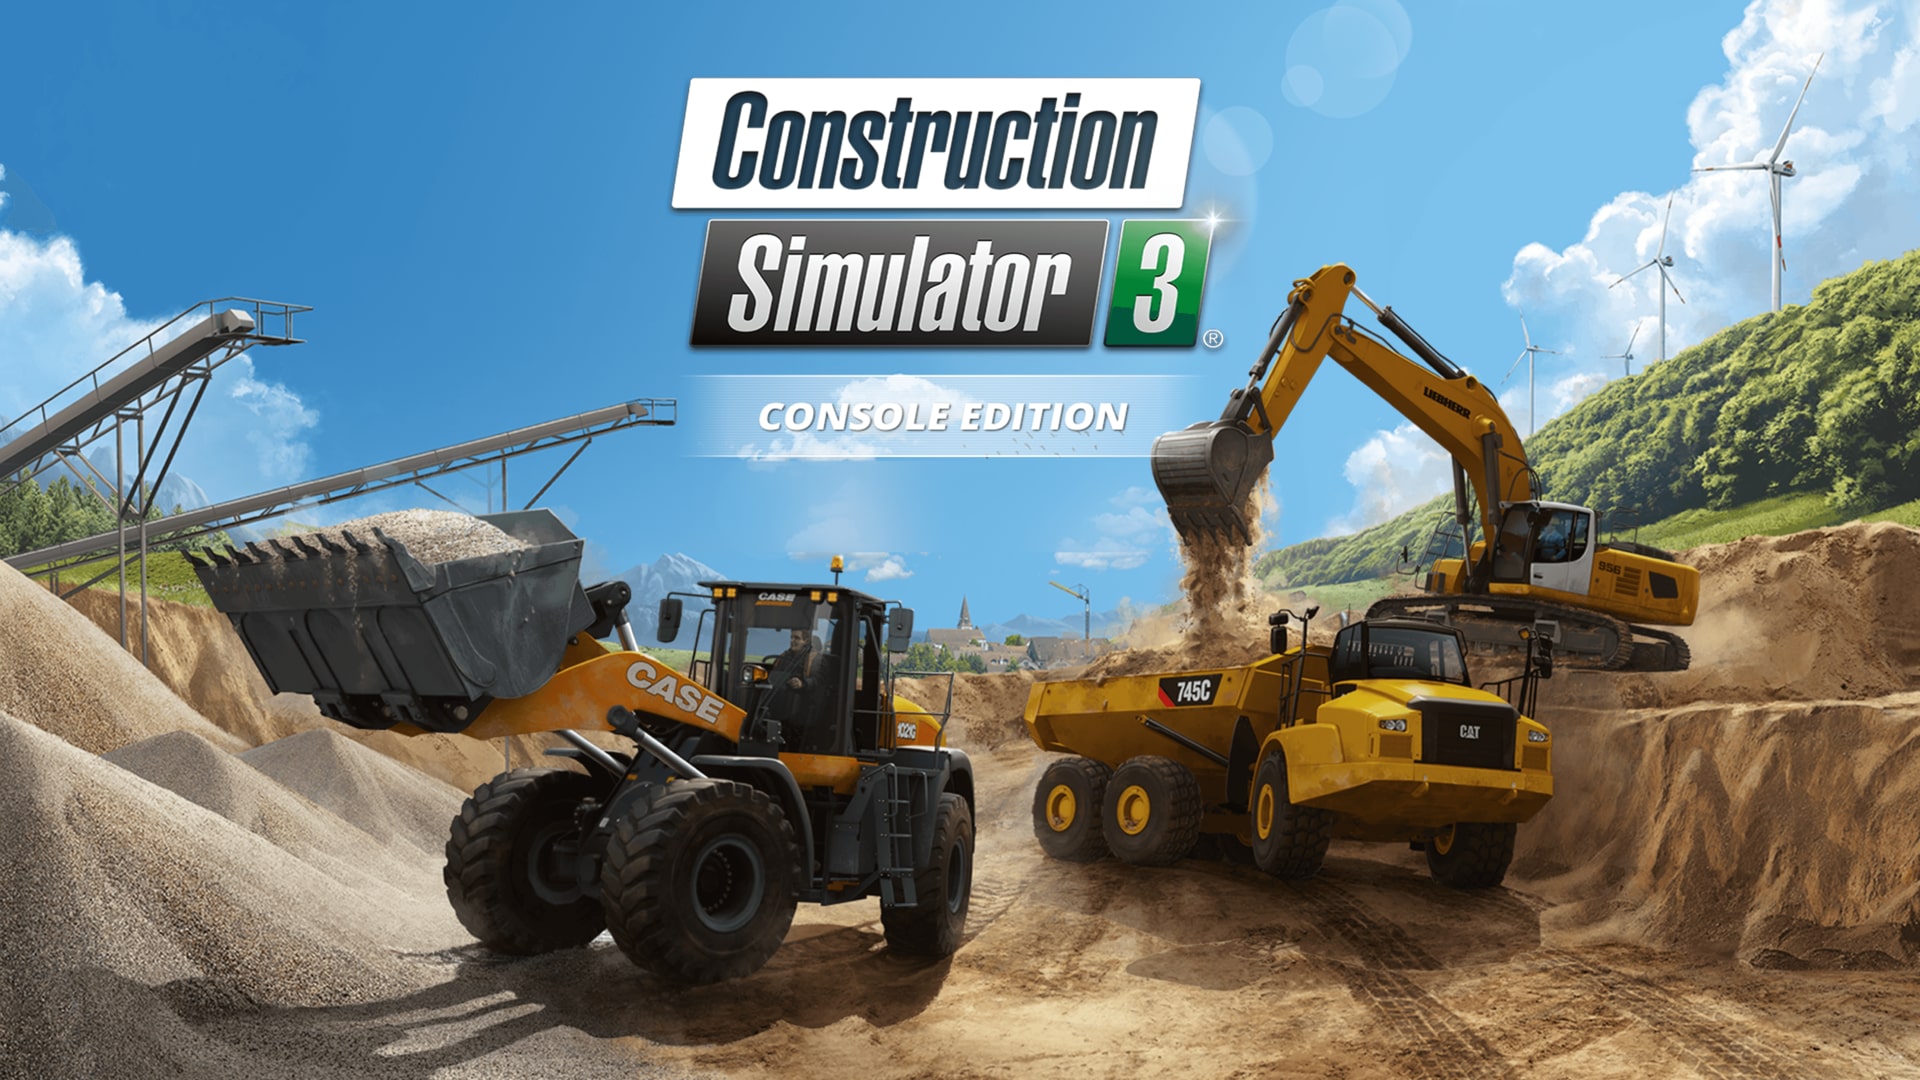 Construction Simulator 3 - Console Edition (Simplified Chinese, English, Korean, Japanese, Traditional Chinese)